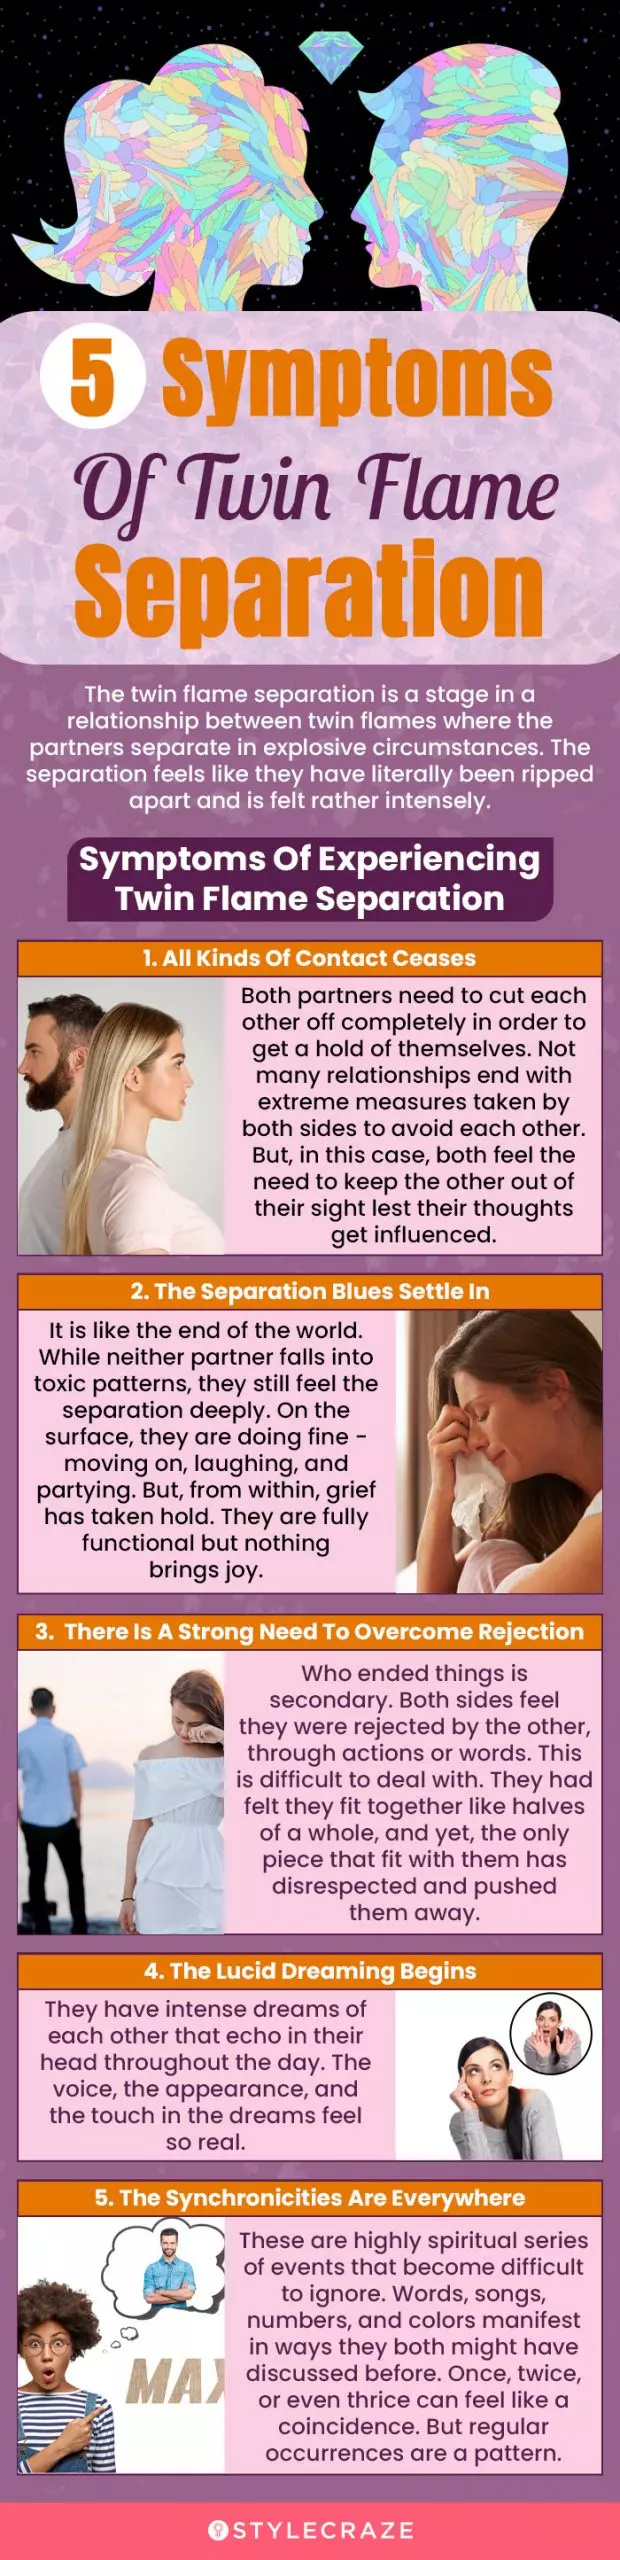 5 symptoms of twin flame separation (infographic)